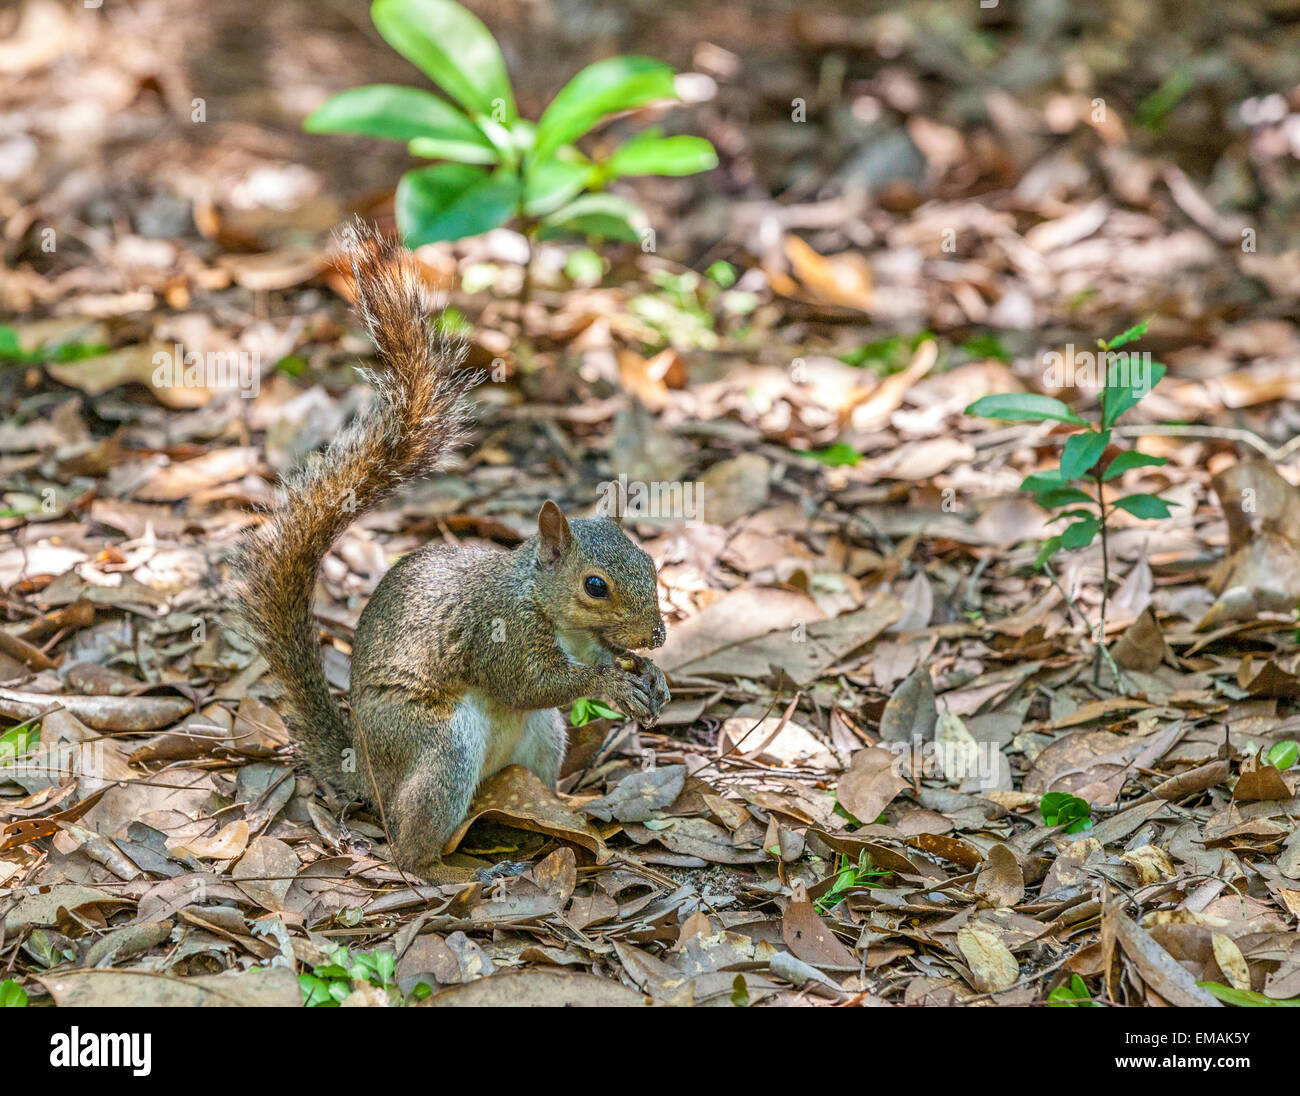 squirrel in the summer garden protects her food Stock Photo